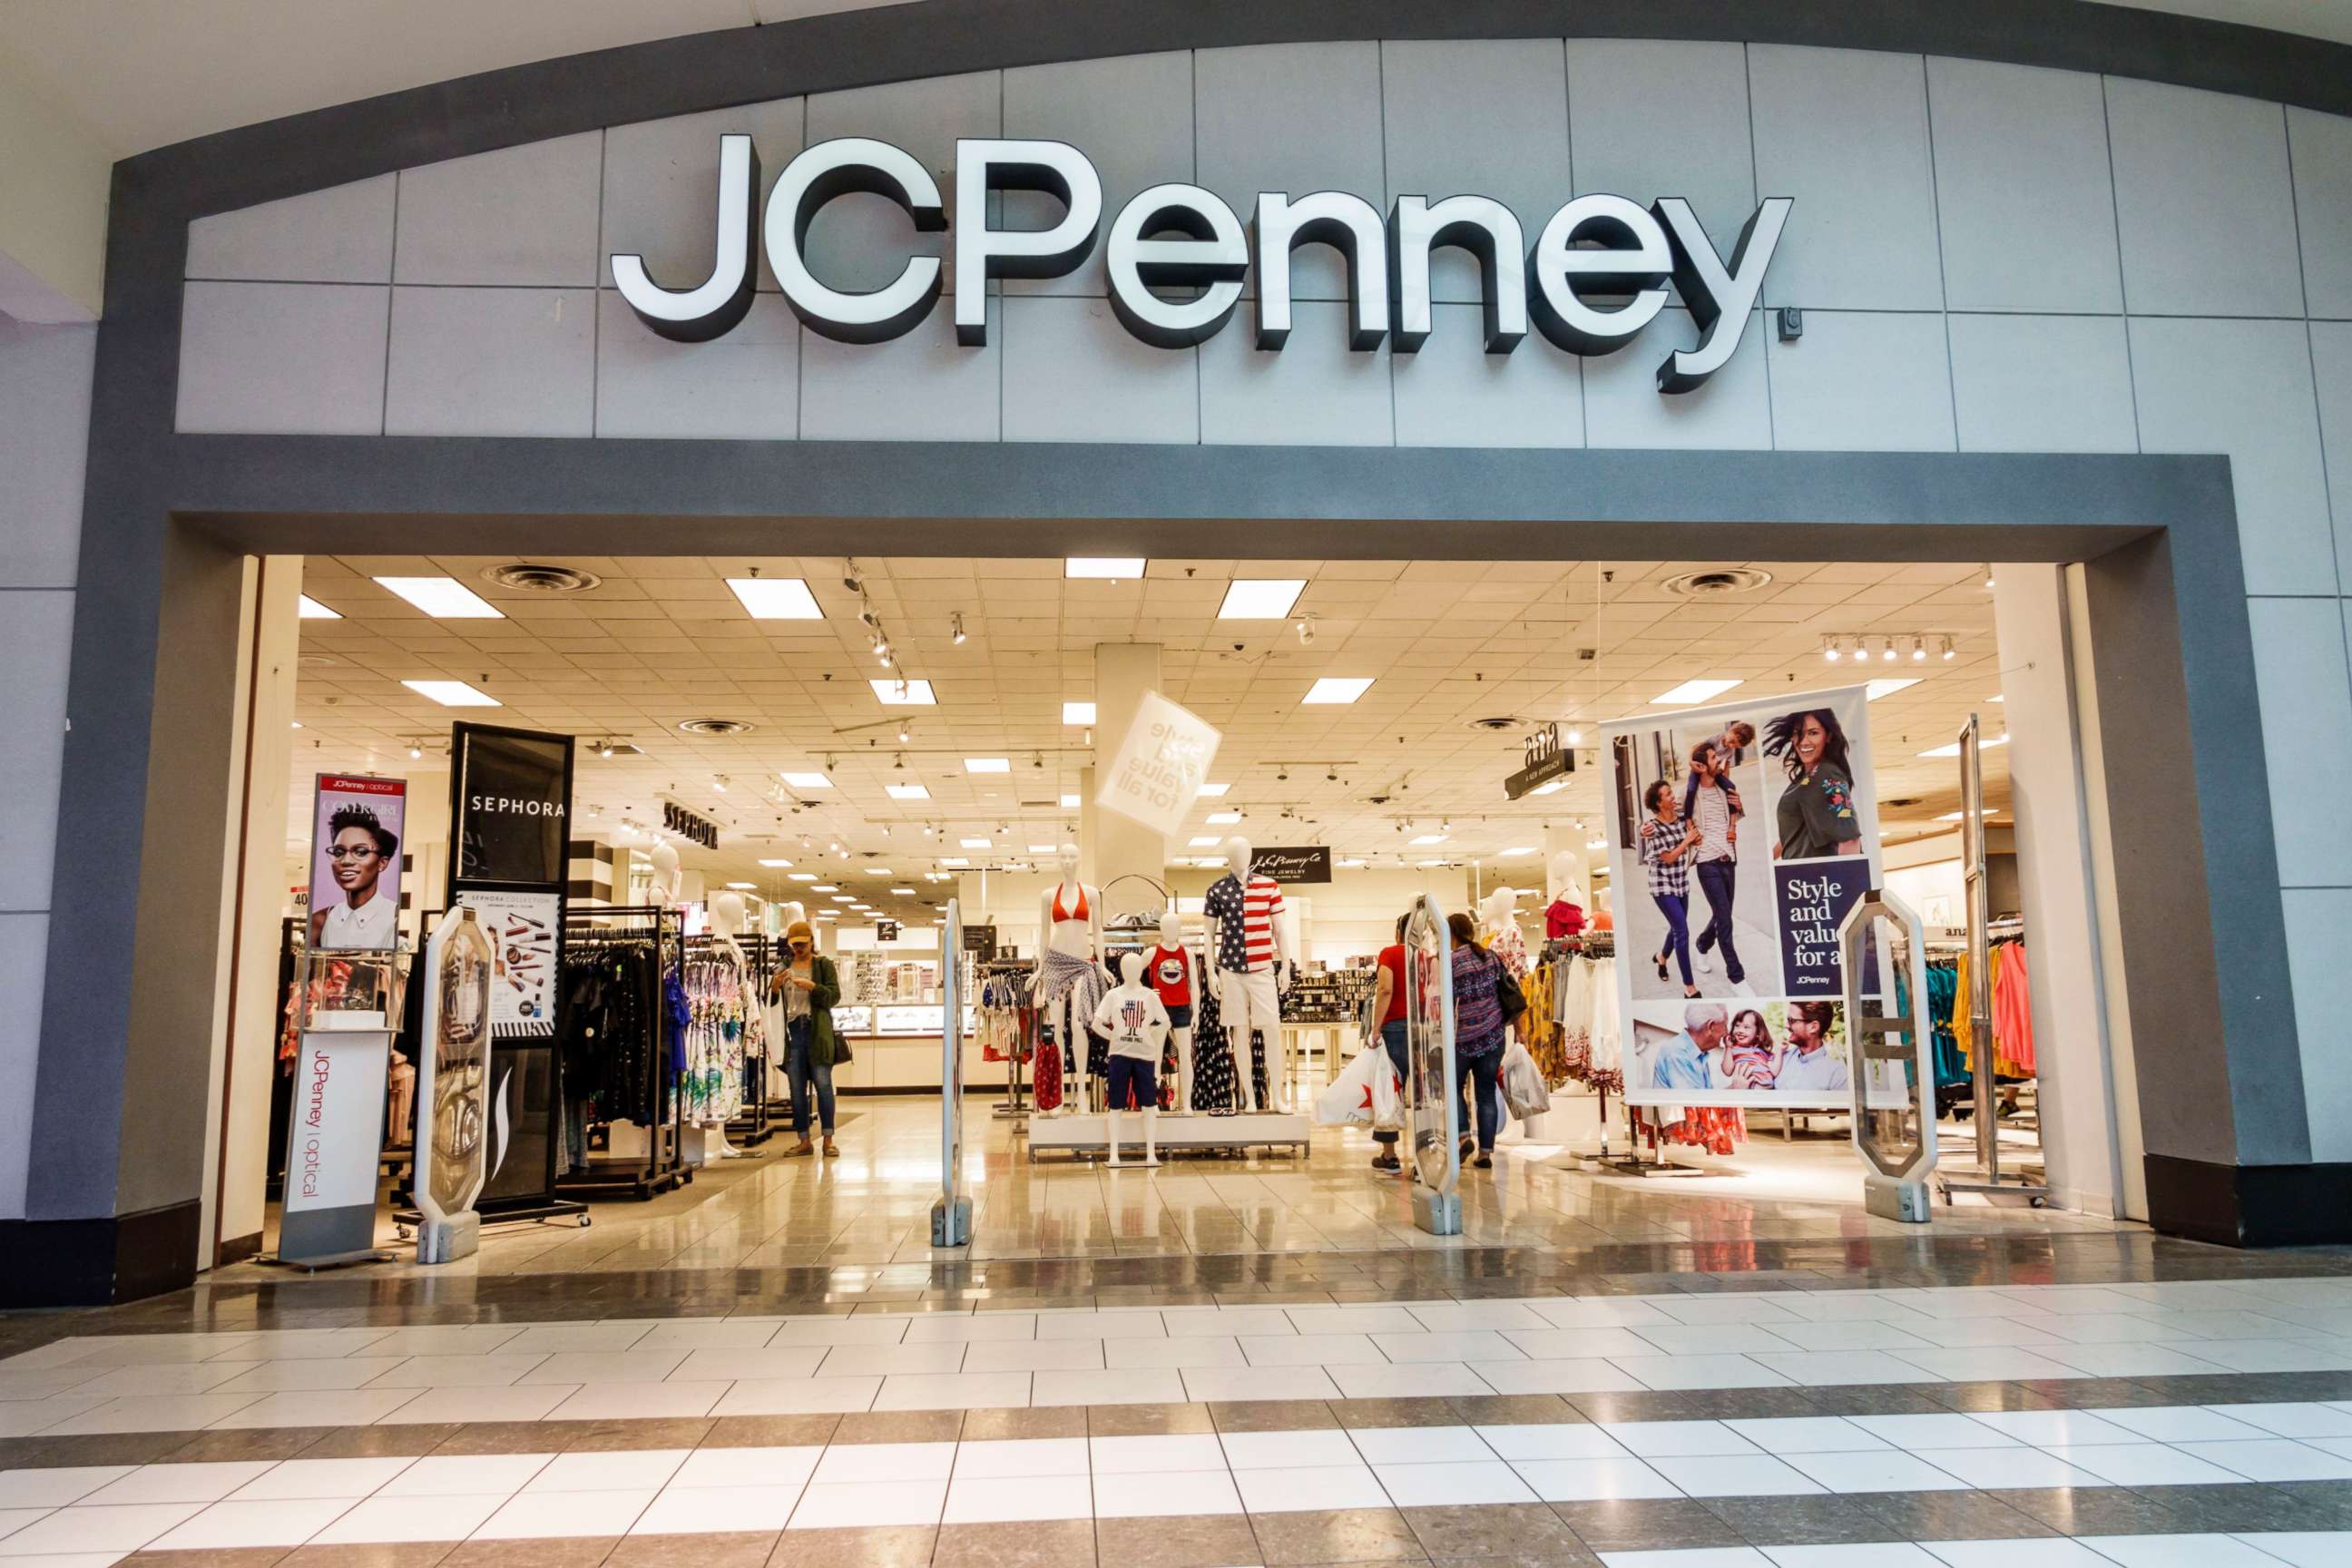 JC Penney: Here's the deal! Shop our weekly store ad